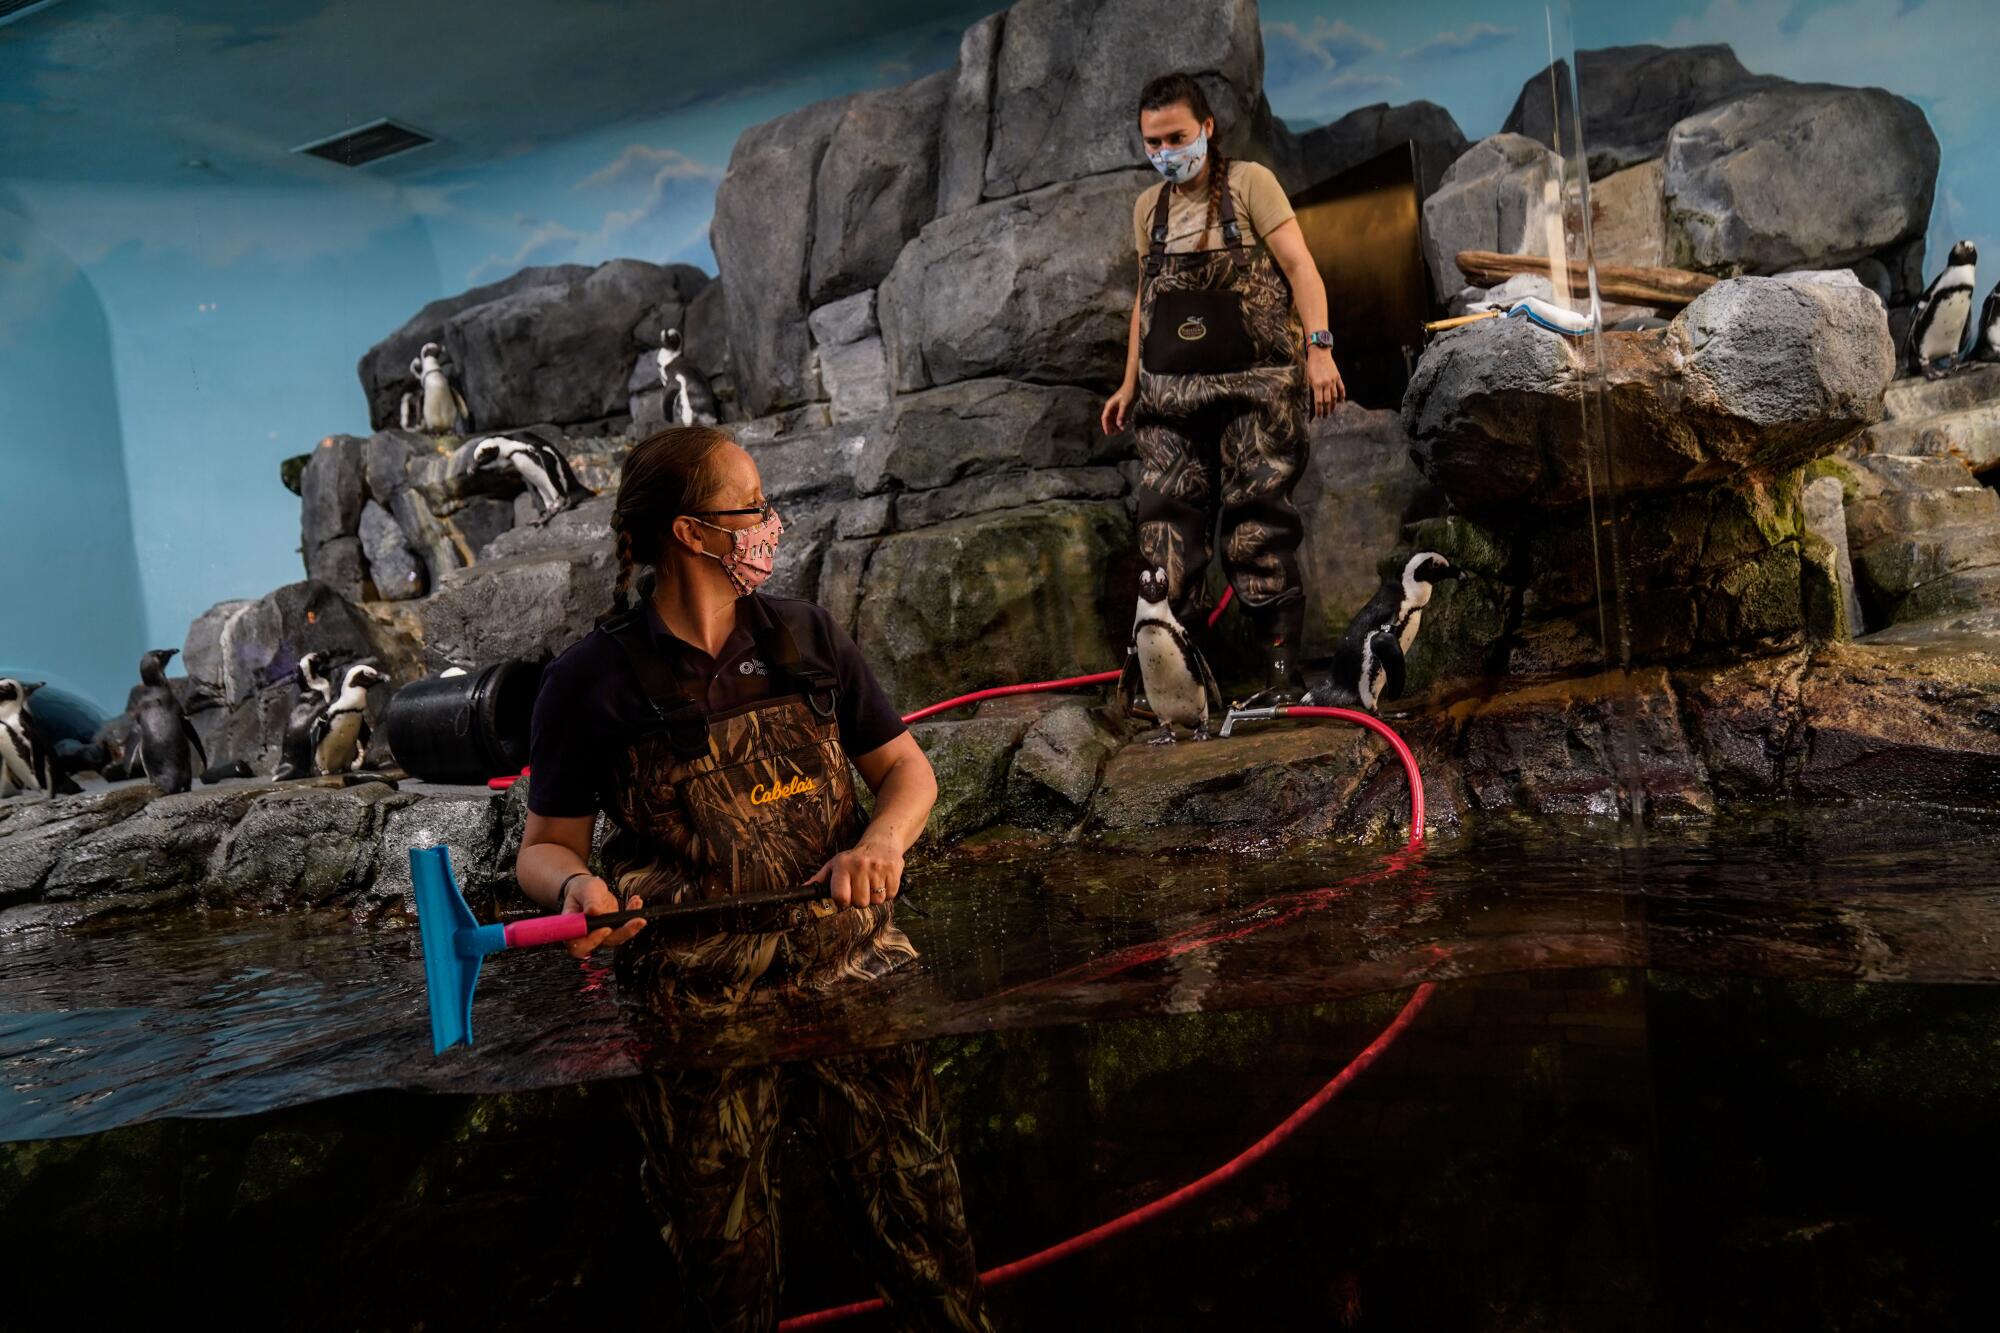 Aquarium workers in masks and waders stand in the water and on the rock outcropping in a penguin enclosure at Monterey Bay